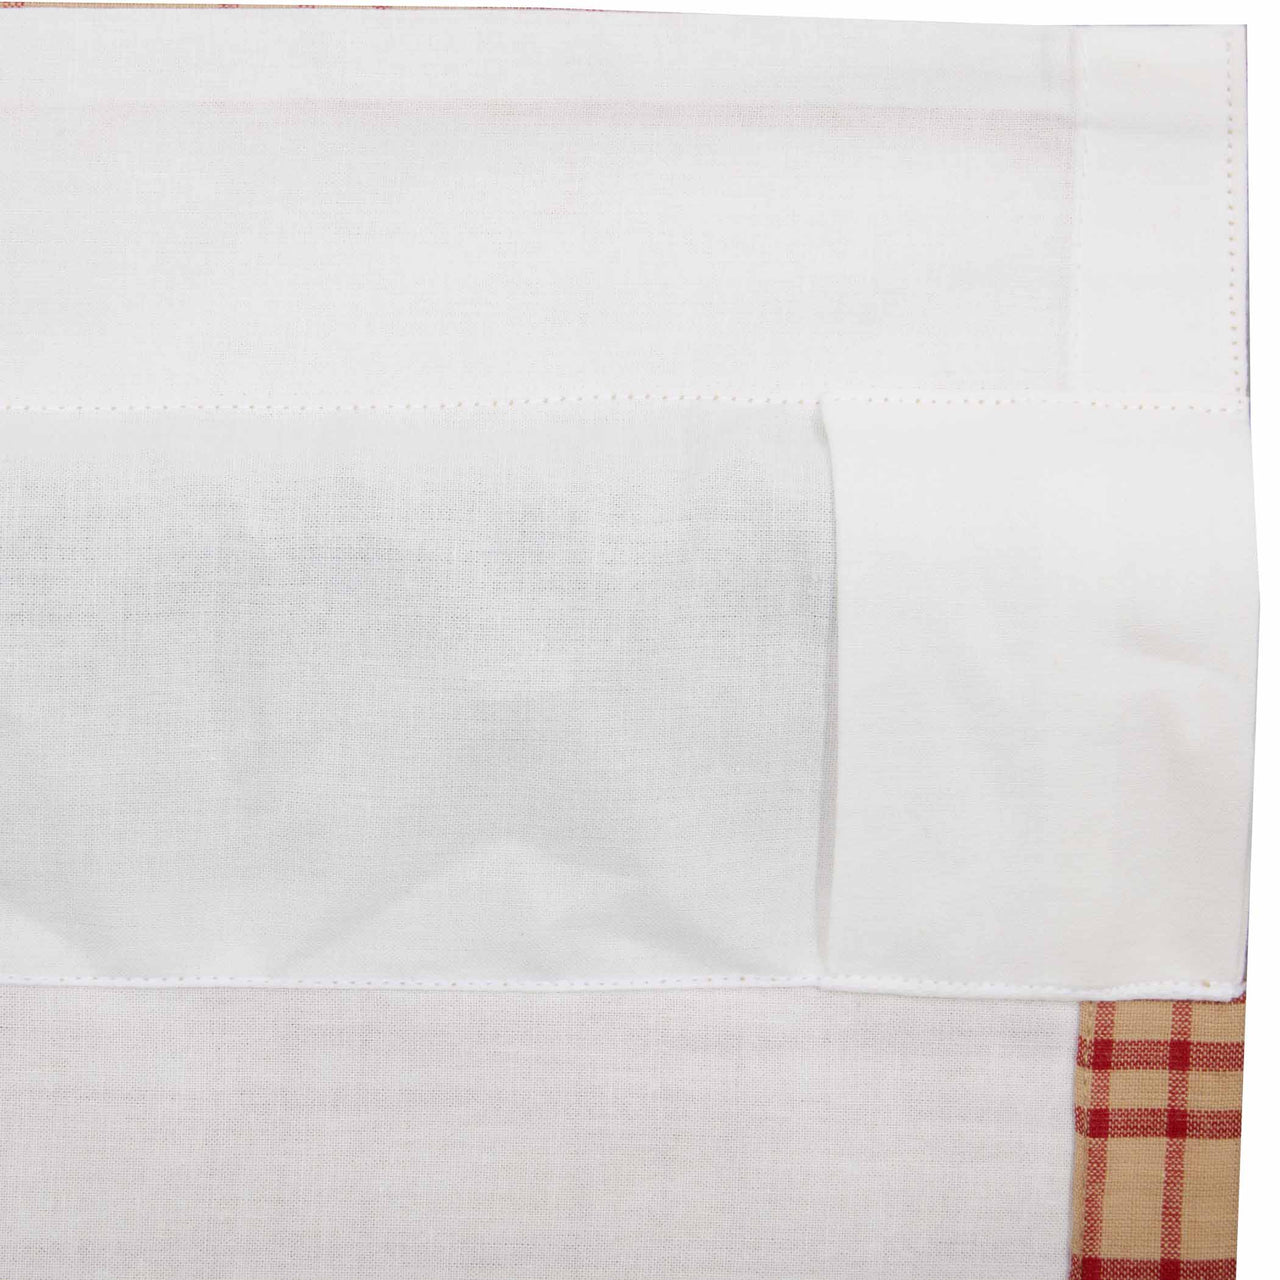 Sawyer Mill Red Plaid Prairie Long Panel Curtain Set of 2 VHC Brands